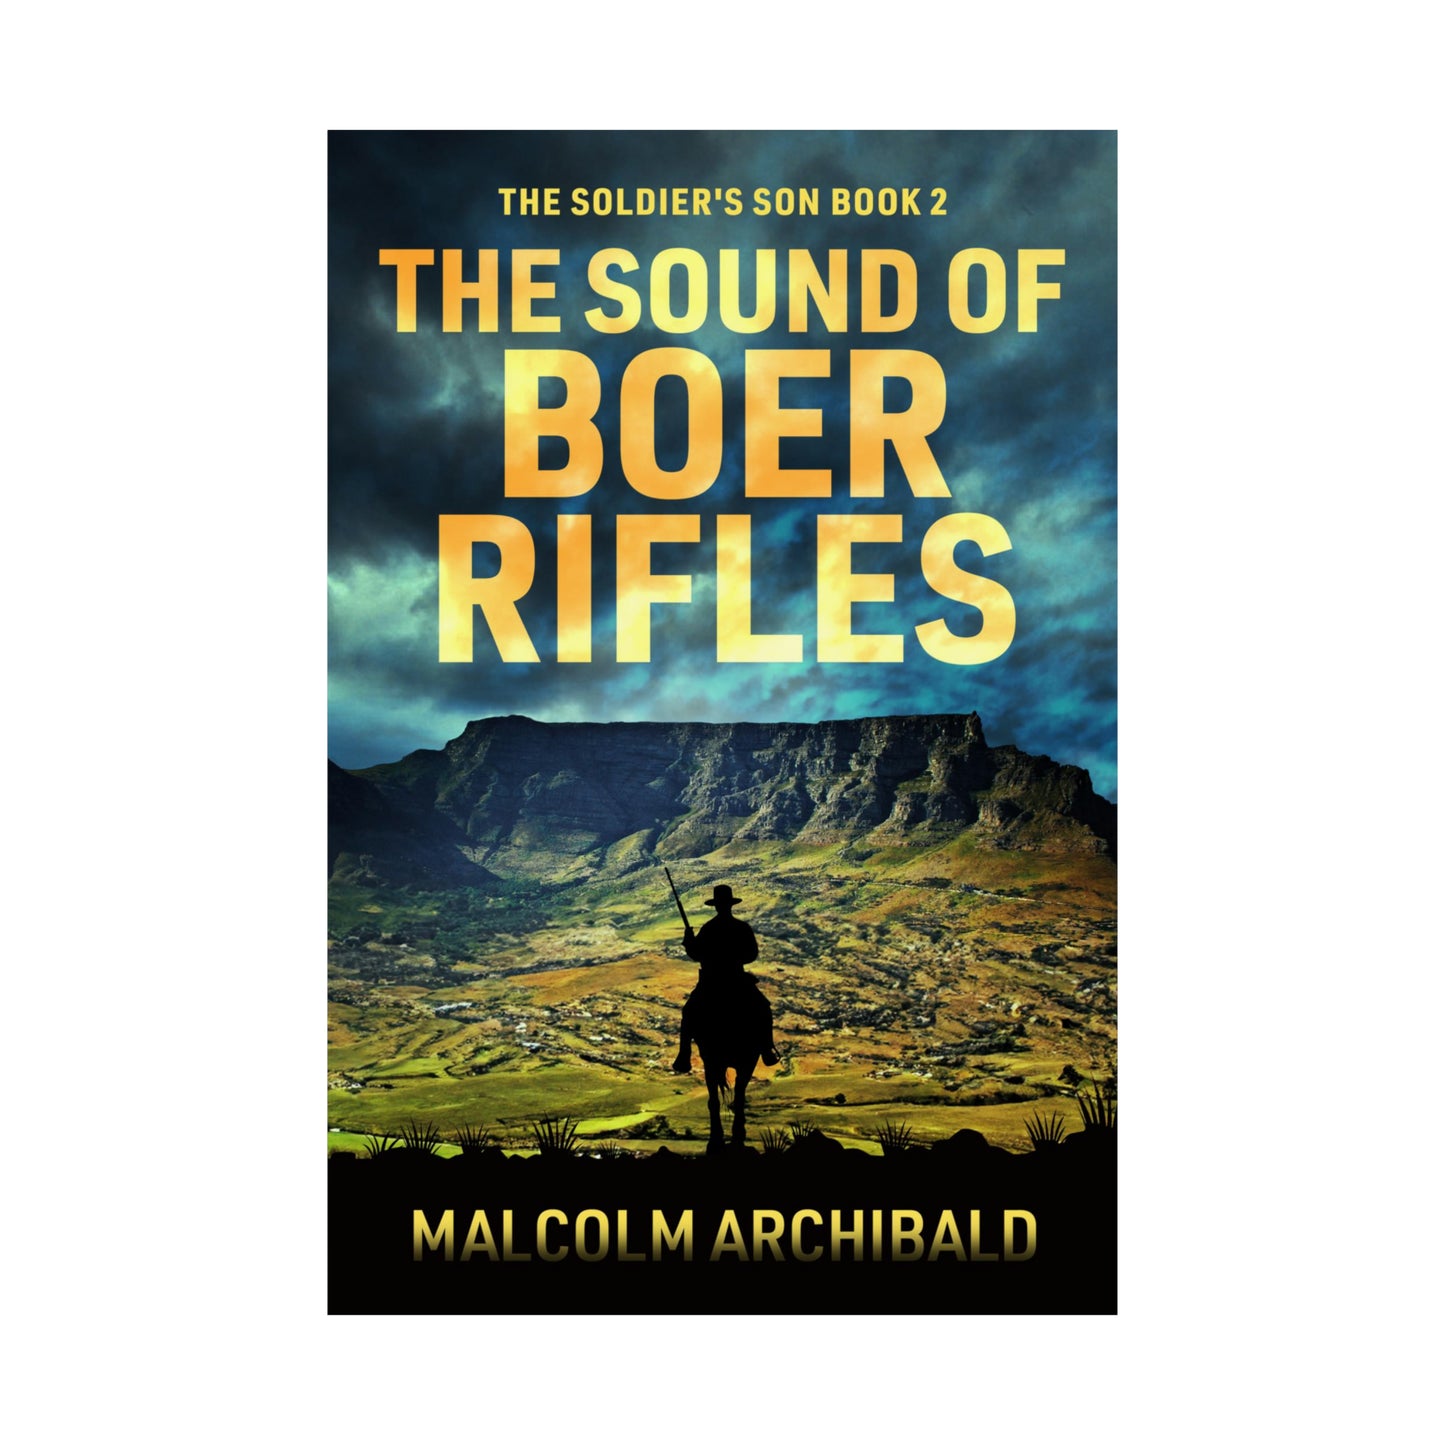 The Sound of Boer Rifles - Matte Poster